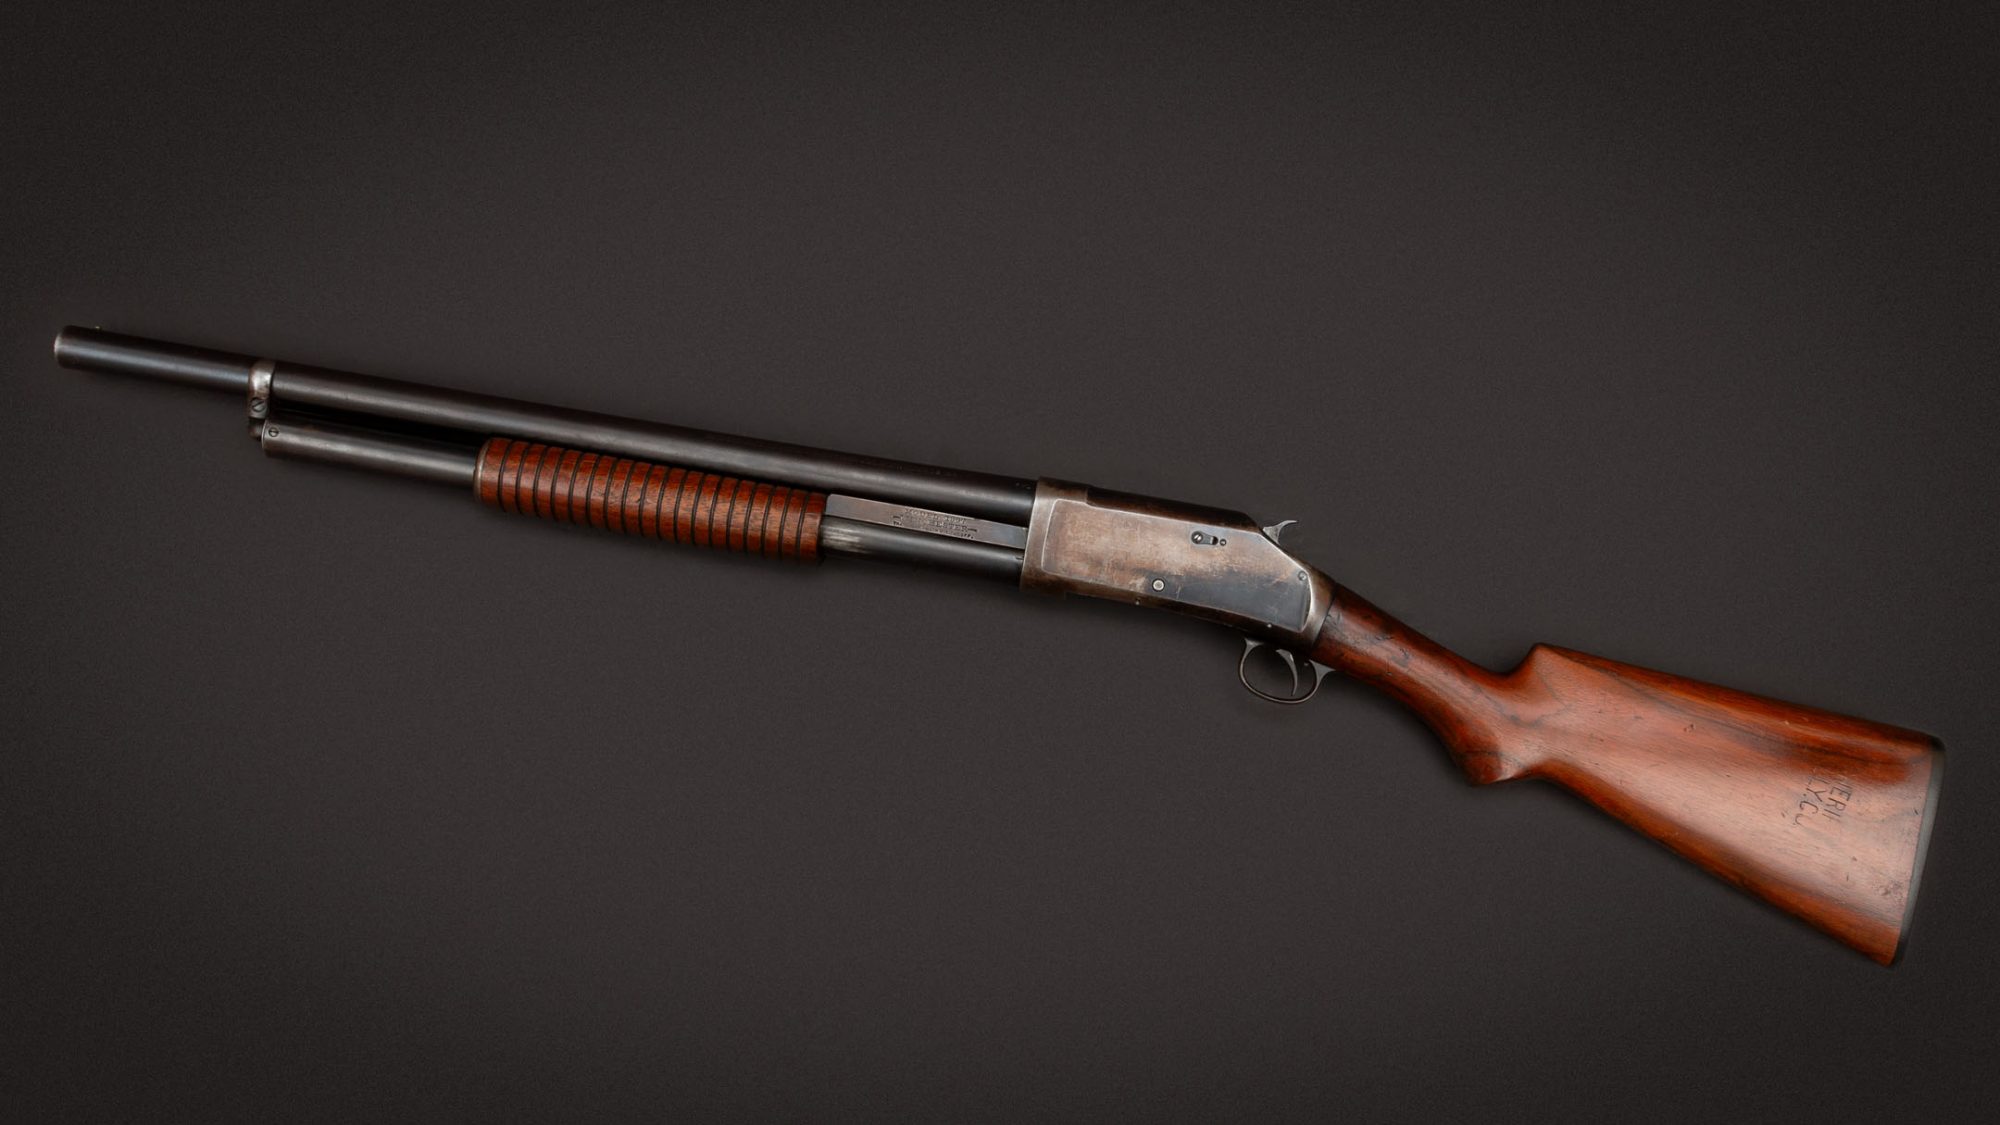 Winchester Model 1897 12 gauge pump action shotgun, for sale by Turnbull Restoration Co. of Bloomfield, NY